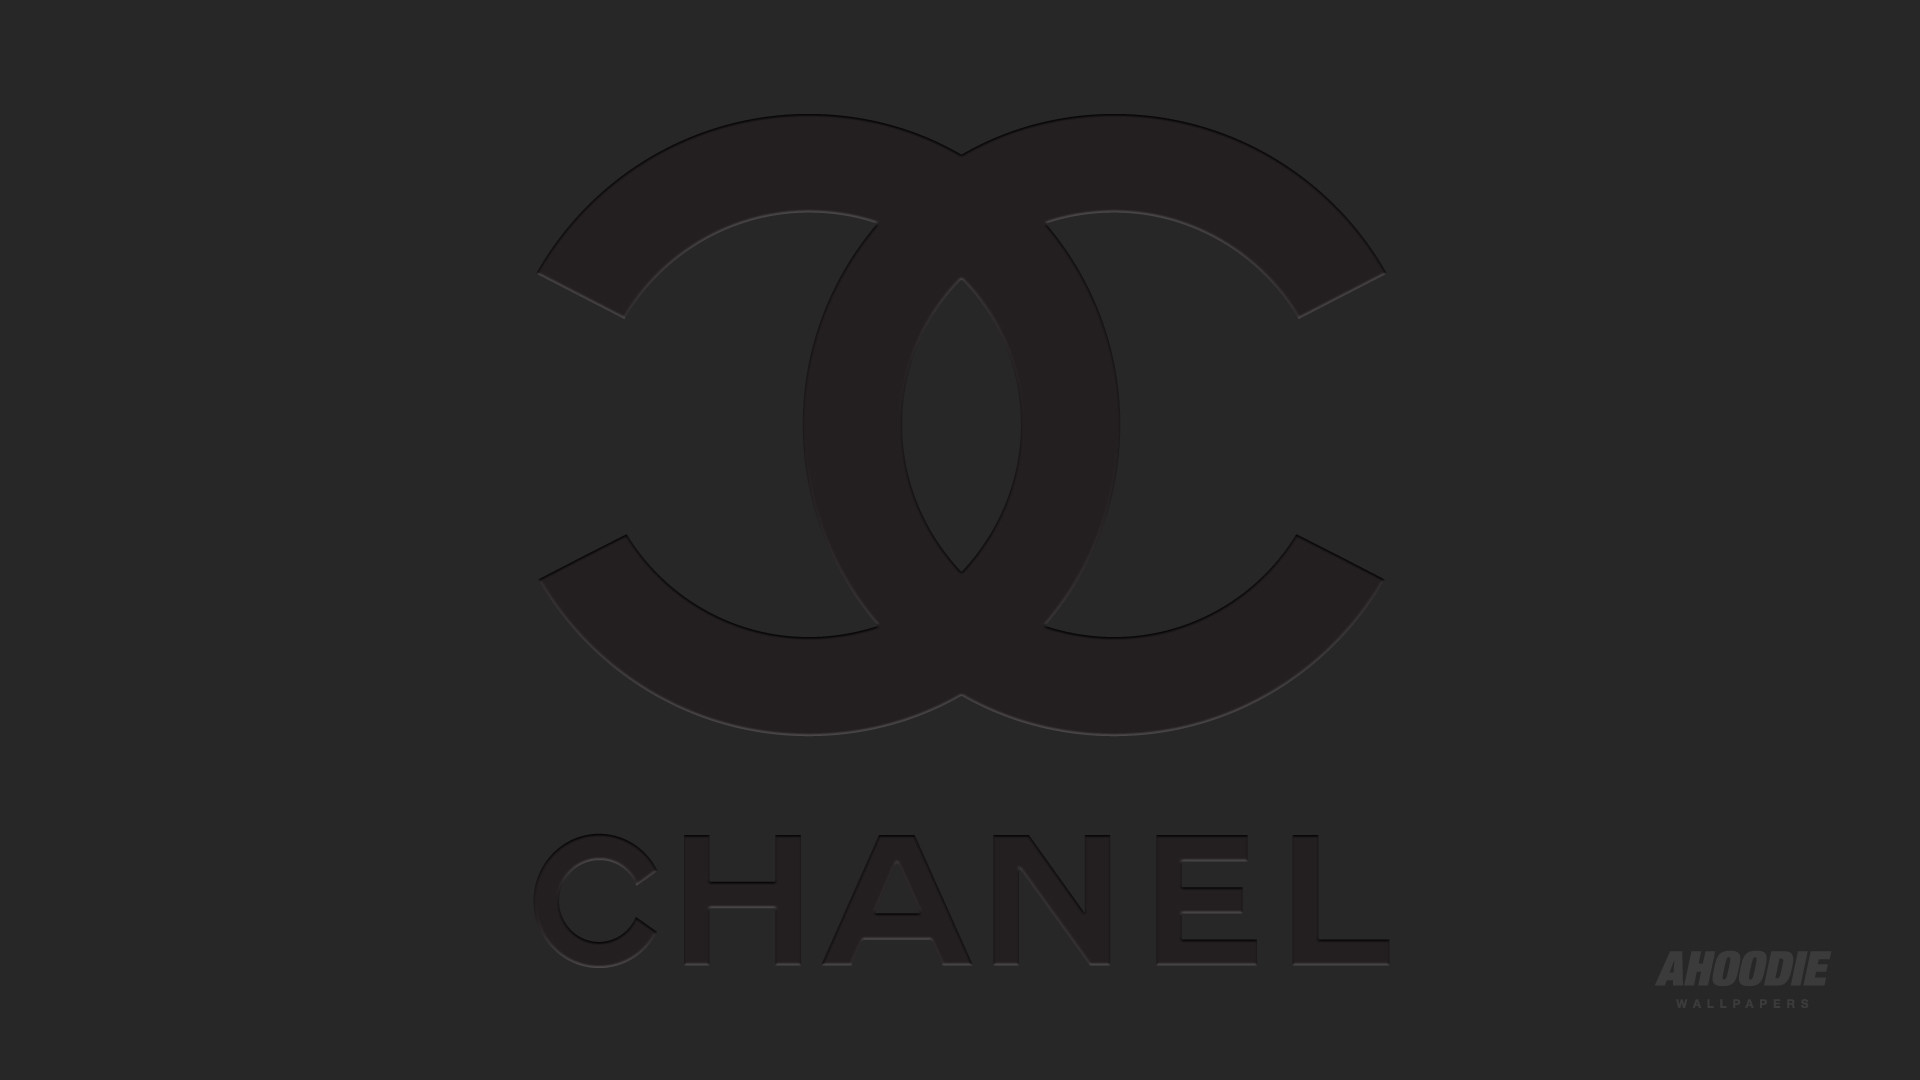 1920x1080 ... Chanel Logo Wallpapers - Wallpaper Cave ...